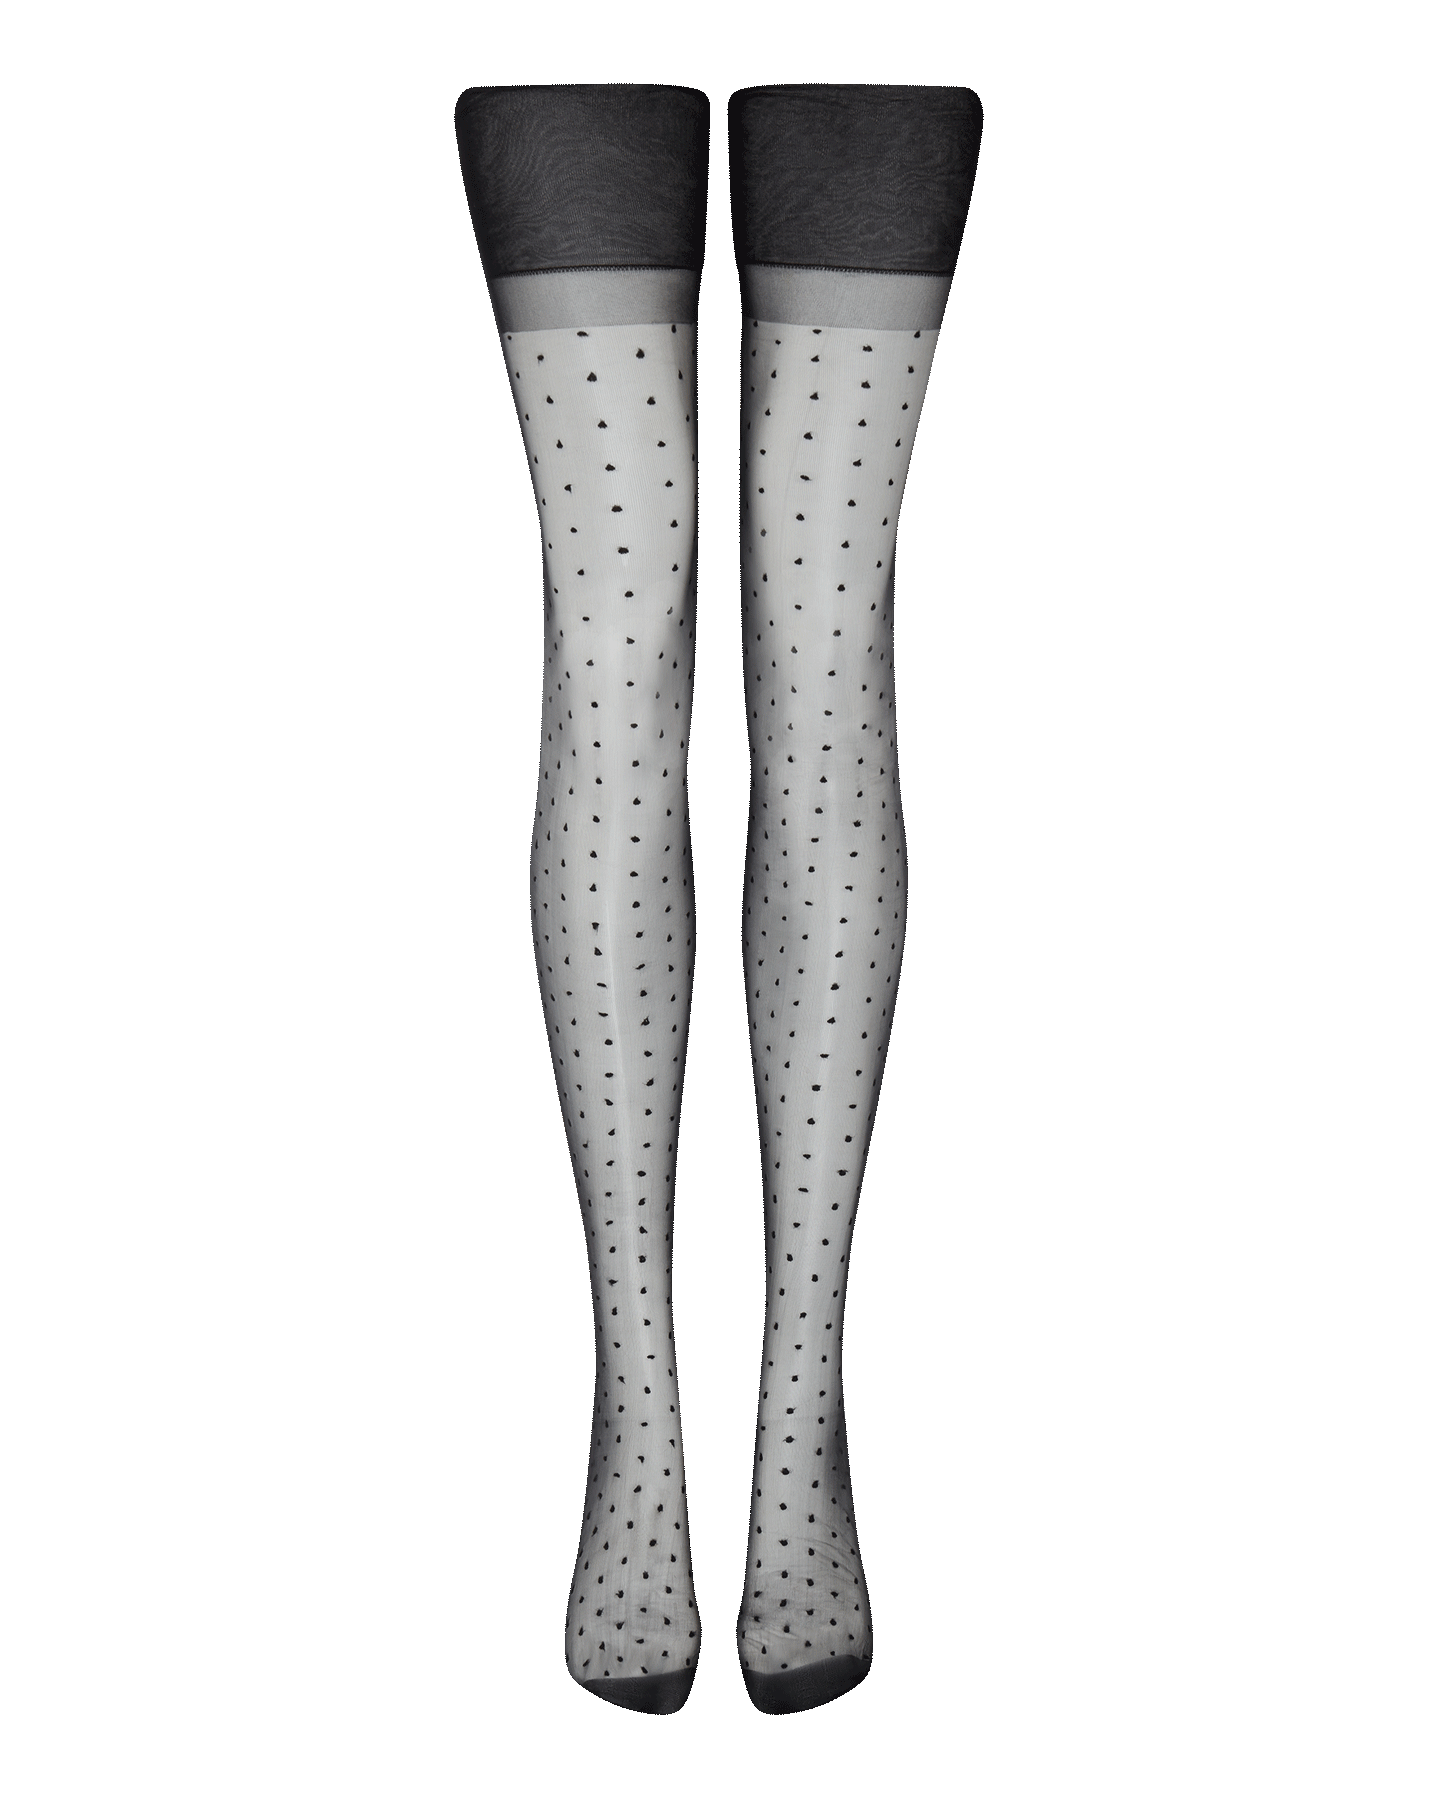 Onnix 1 Stockings in Black/Black | By Agent Provocateur